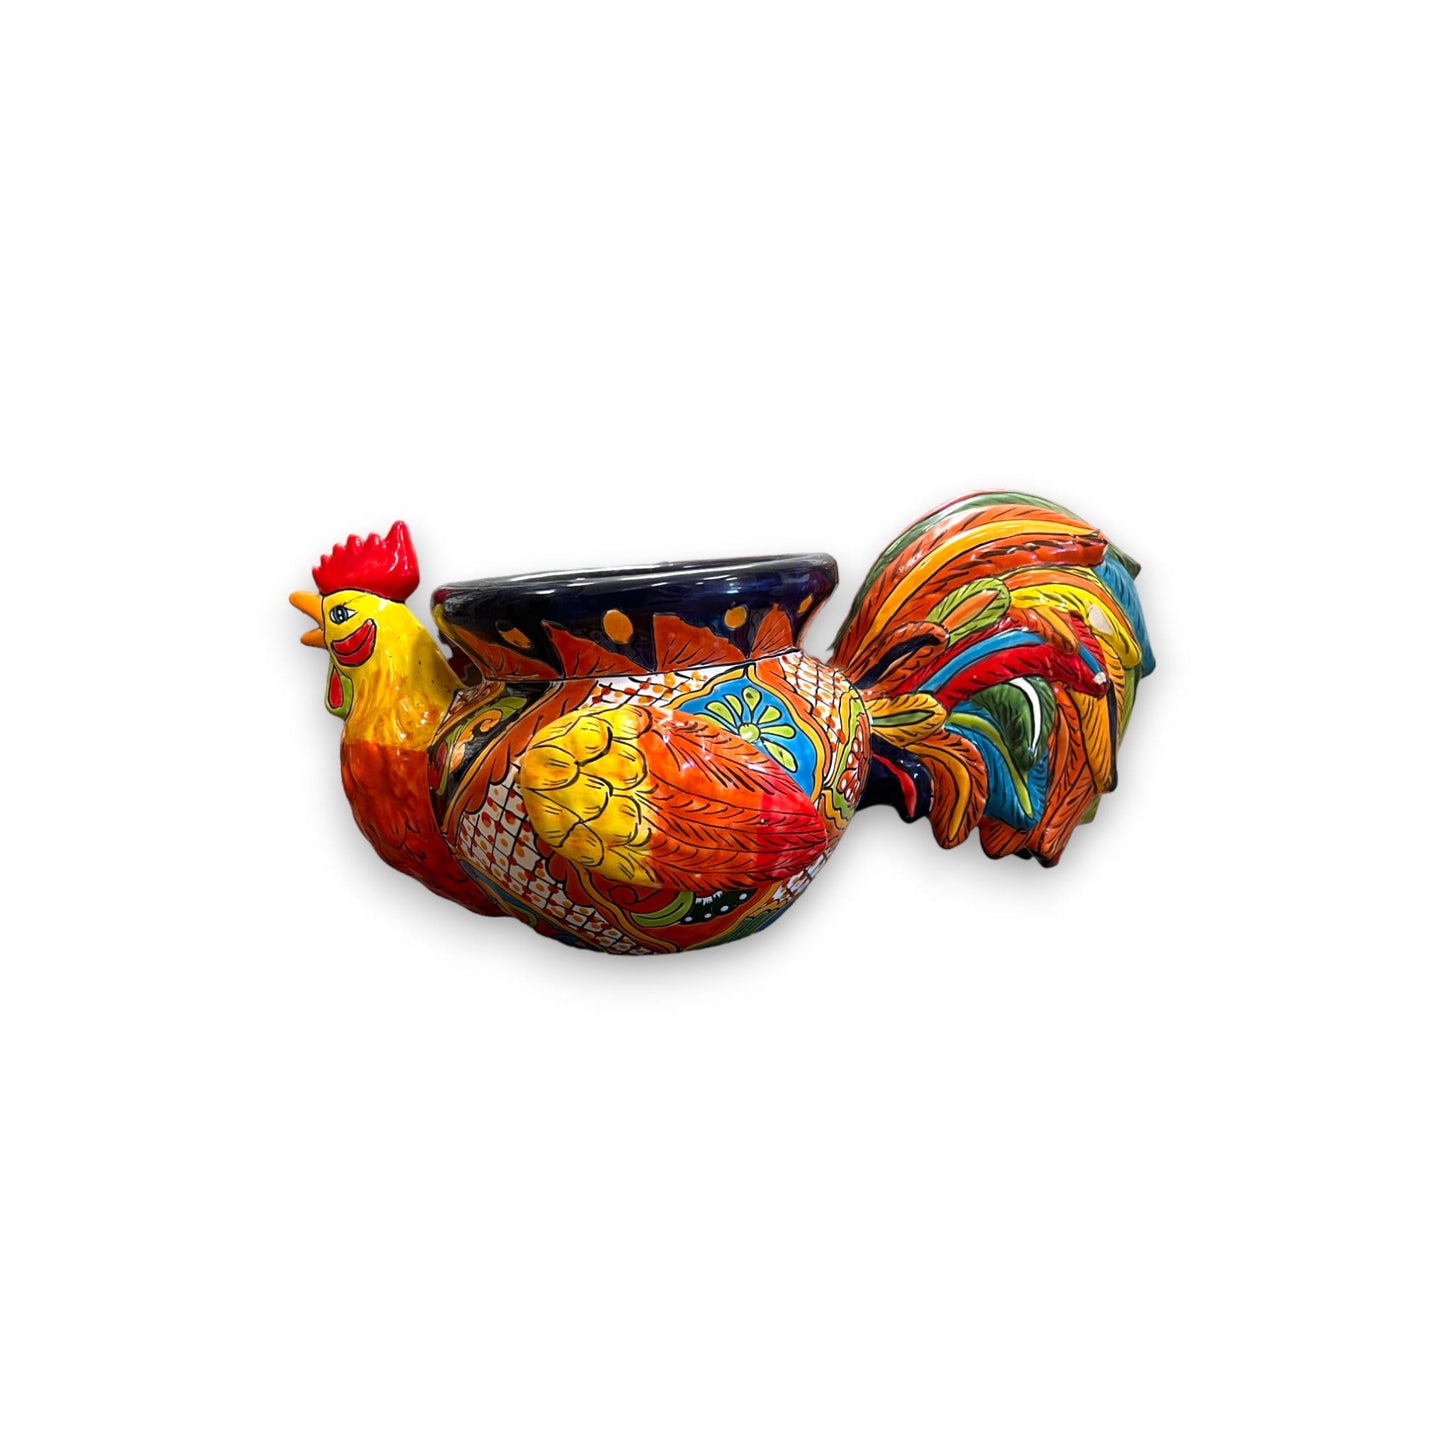 Colorful Talavera Rooster Planter | Handcrafted Mexican Pottery (12" Wide)